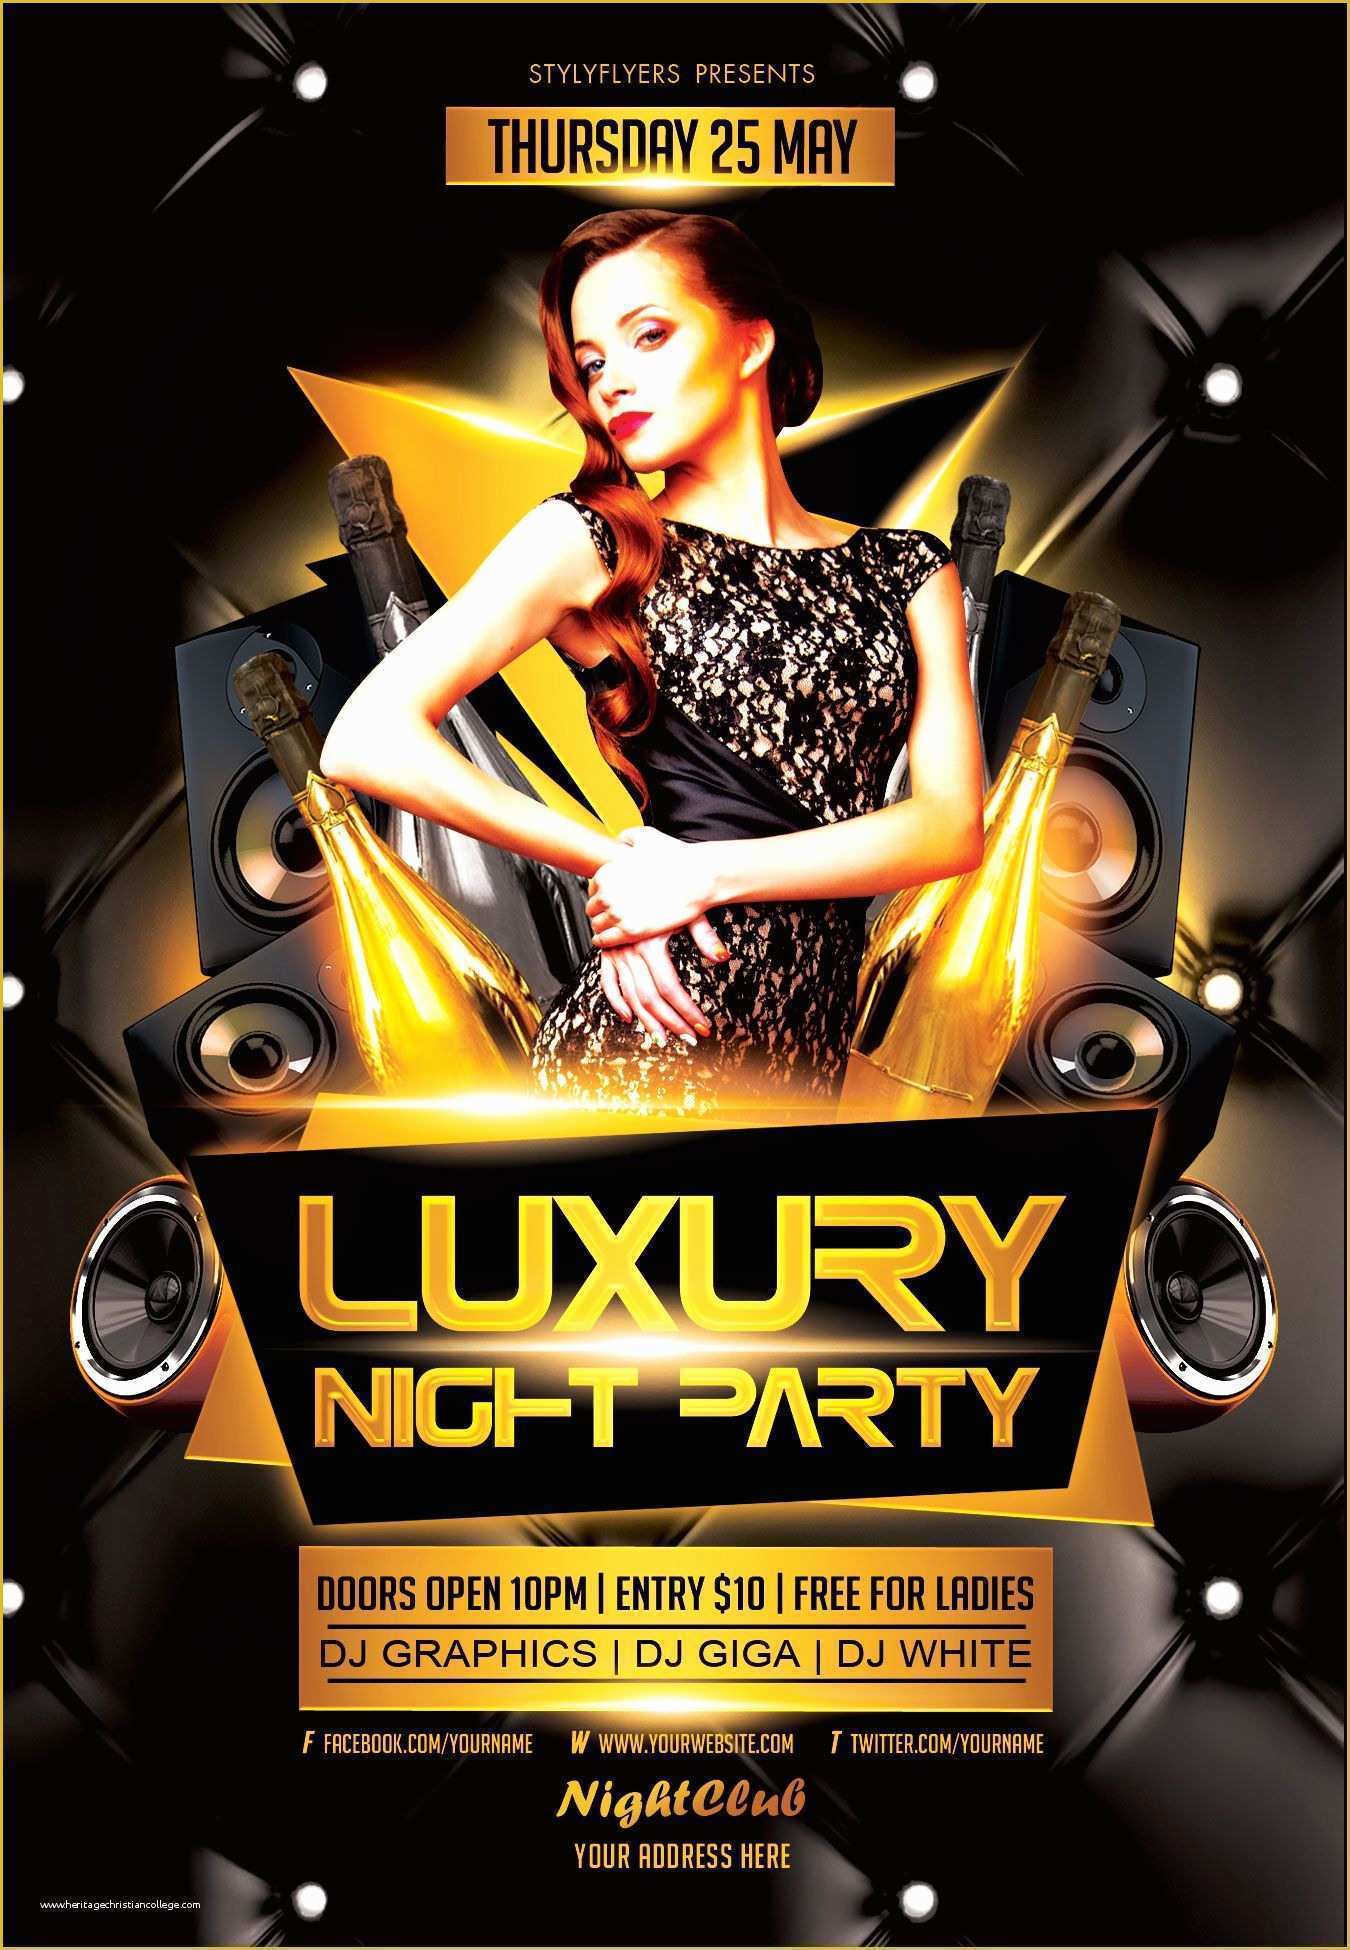 party-flyer-template-free-download-of-free-luxury-night-party-flyer-psd-template-by-styleflyer